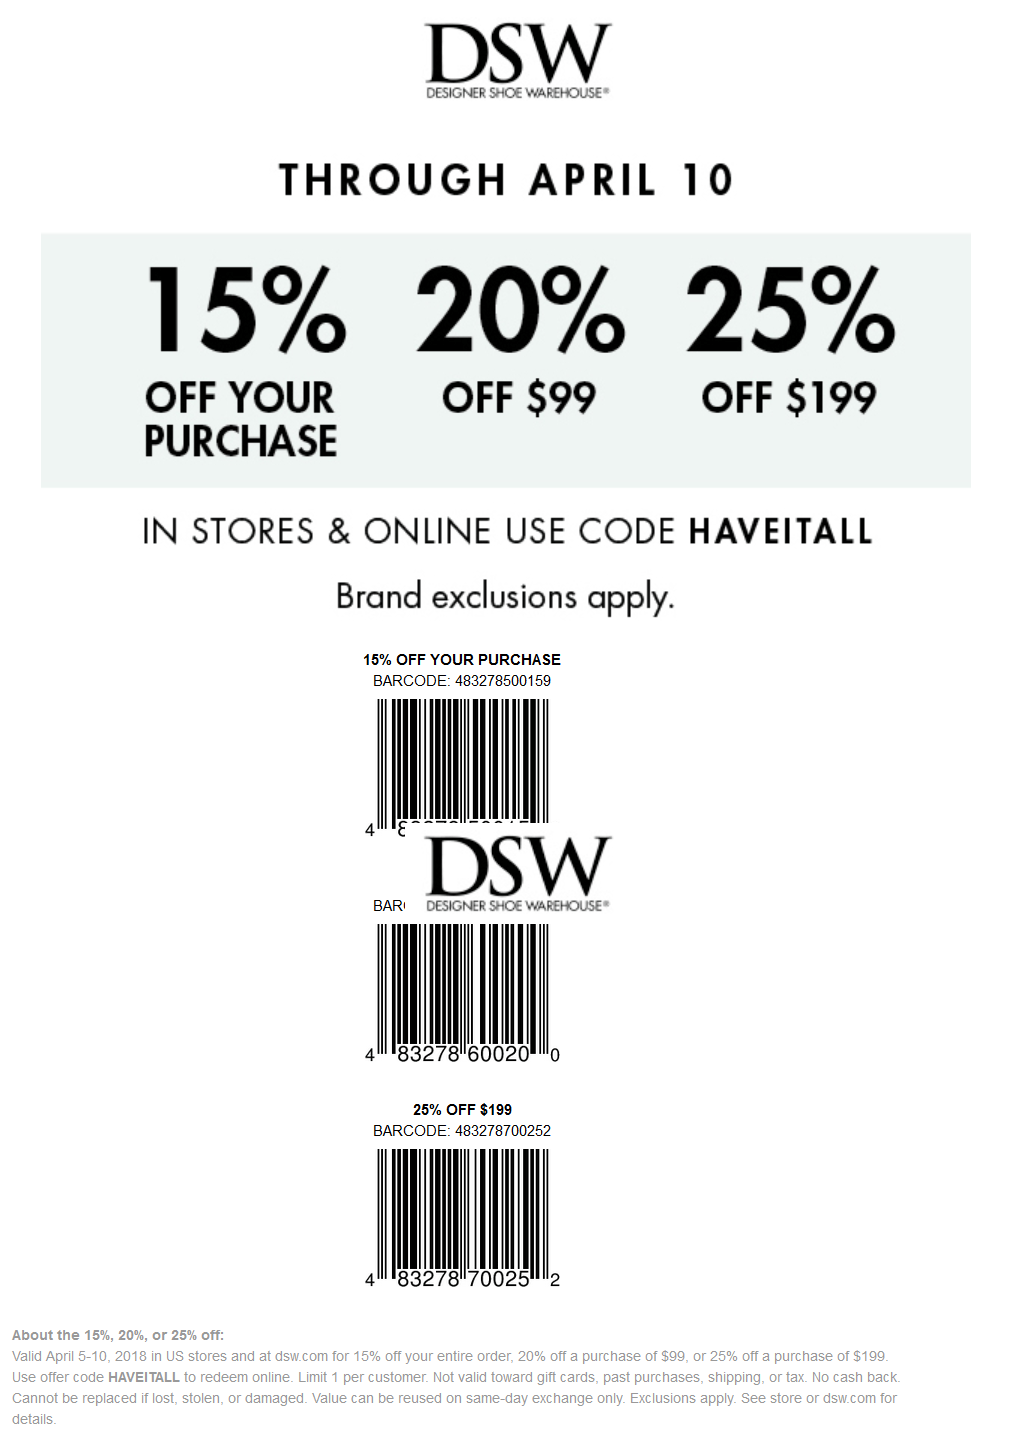 DSW November 2020 Coupons and Promo Codes 🛒